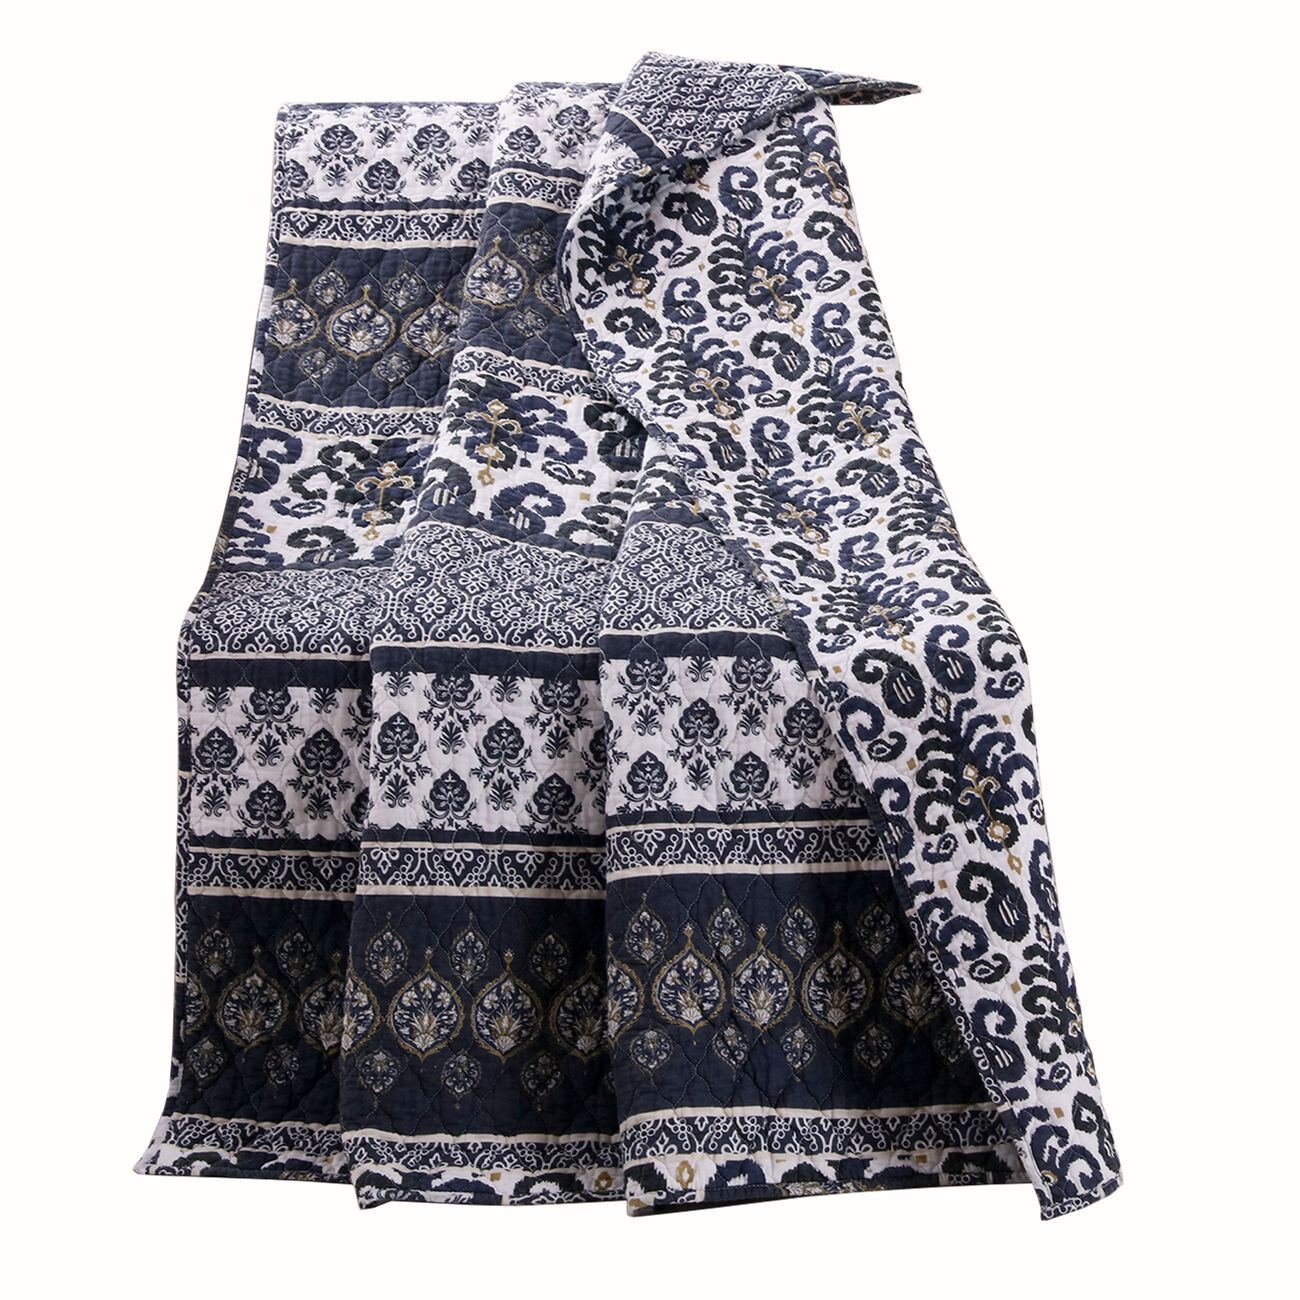 Fabric Reversible Throw Blanket with Ikat and Floral Pattern,Blue and White - BM223388